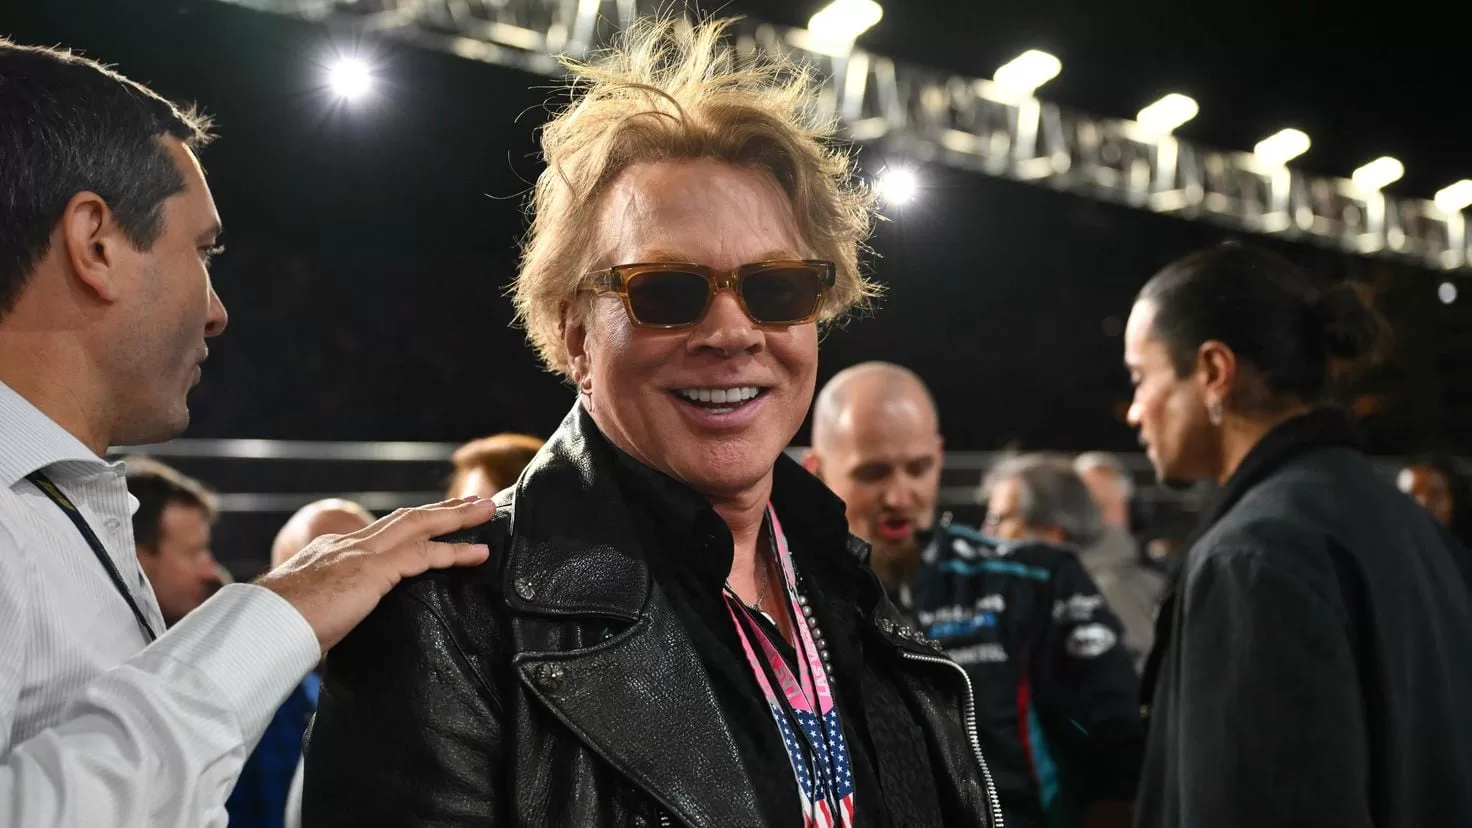 Axl Rose, from Guns N Roses, accused of sexual assault by actress Sheila Kennedy
